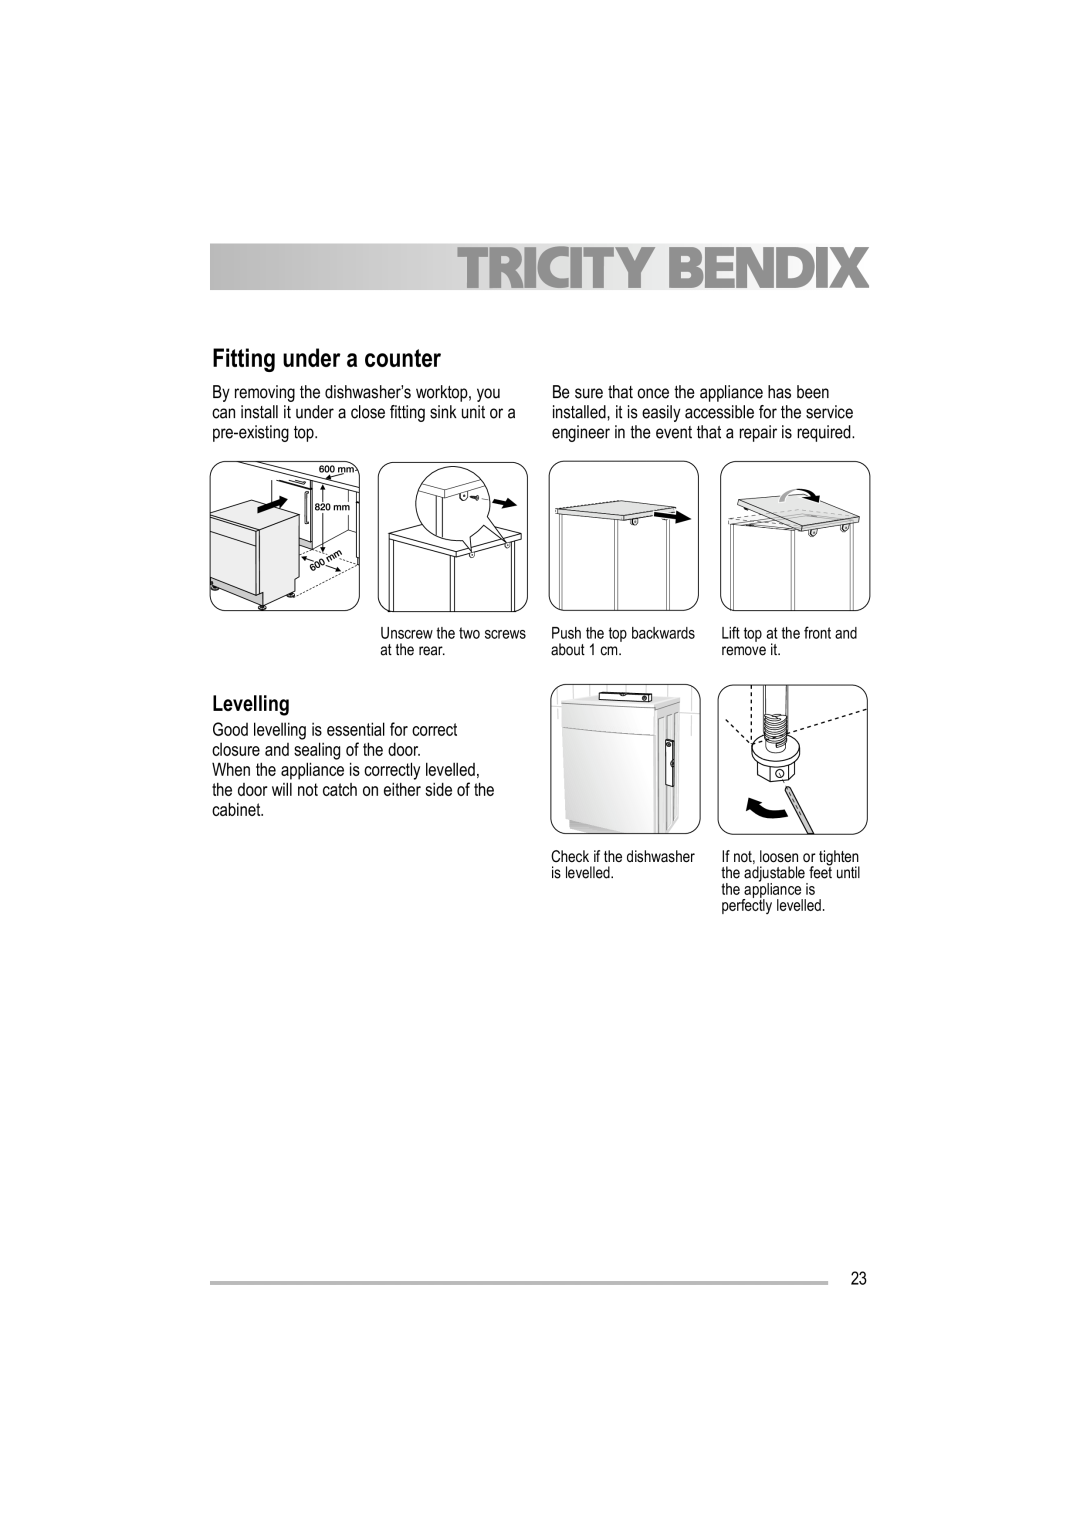 Tricity Bendix TDF 221 manual Fitting under a counter, Levelling 